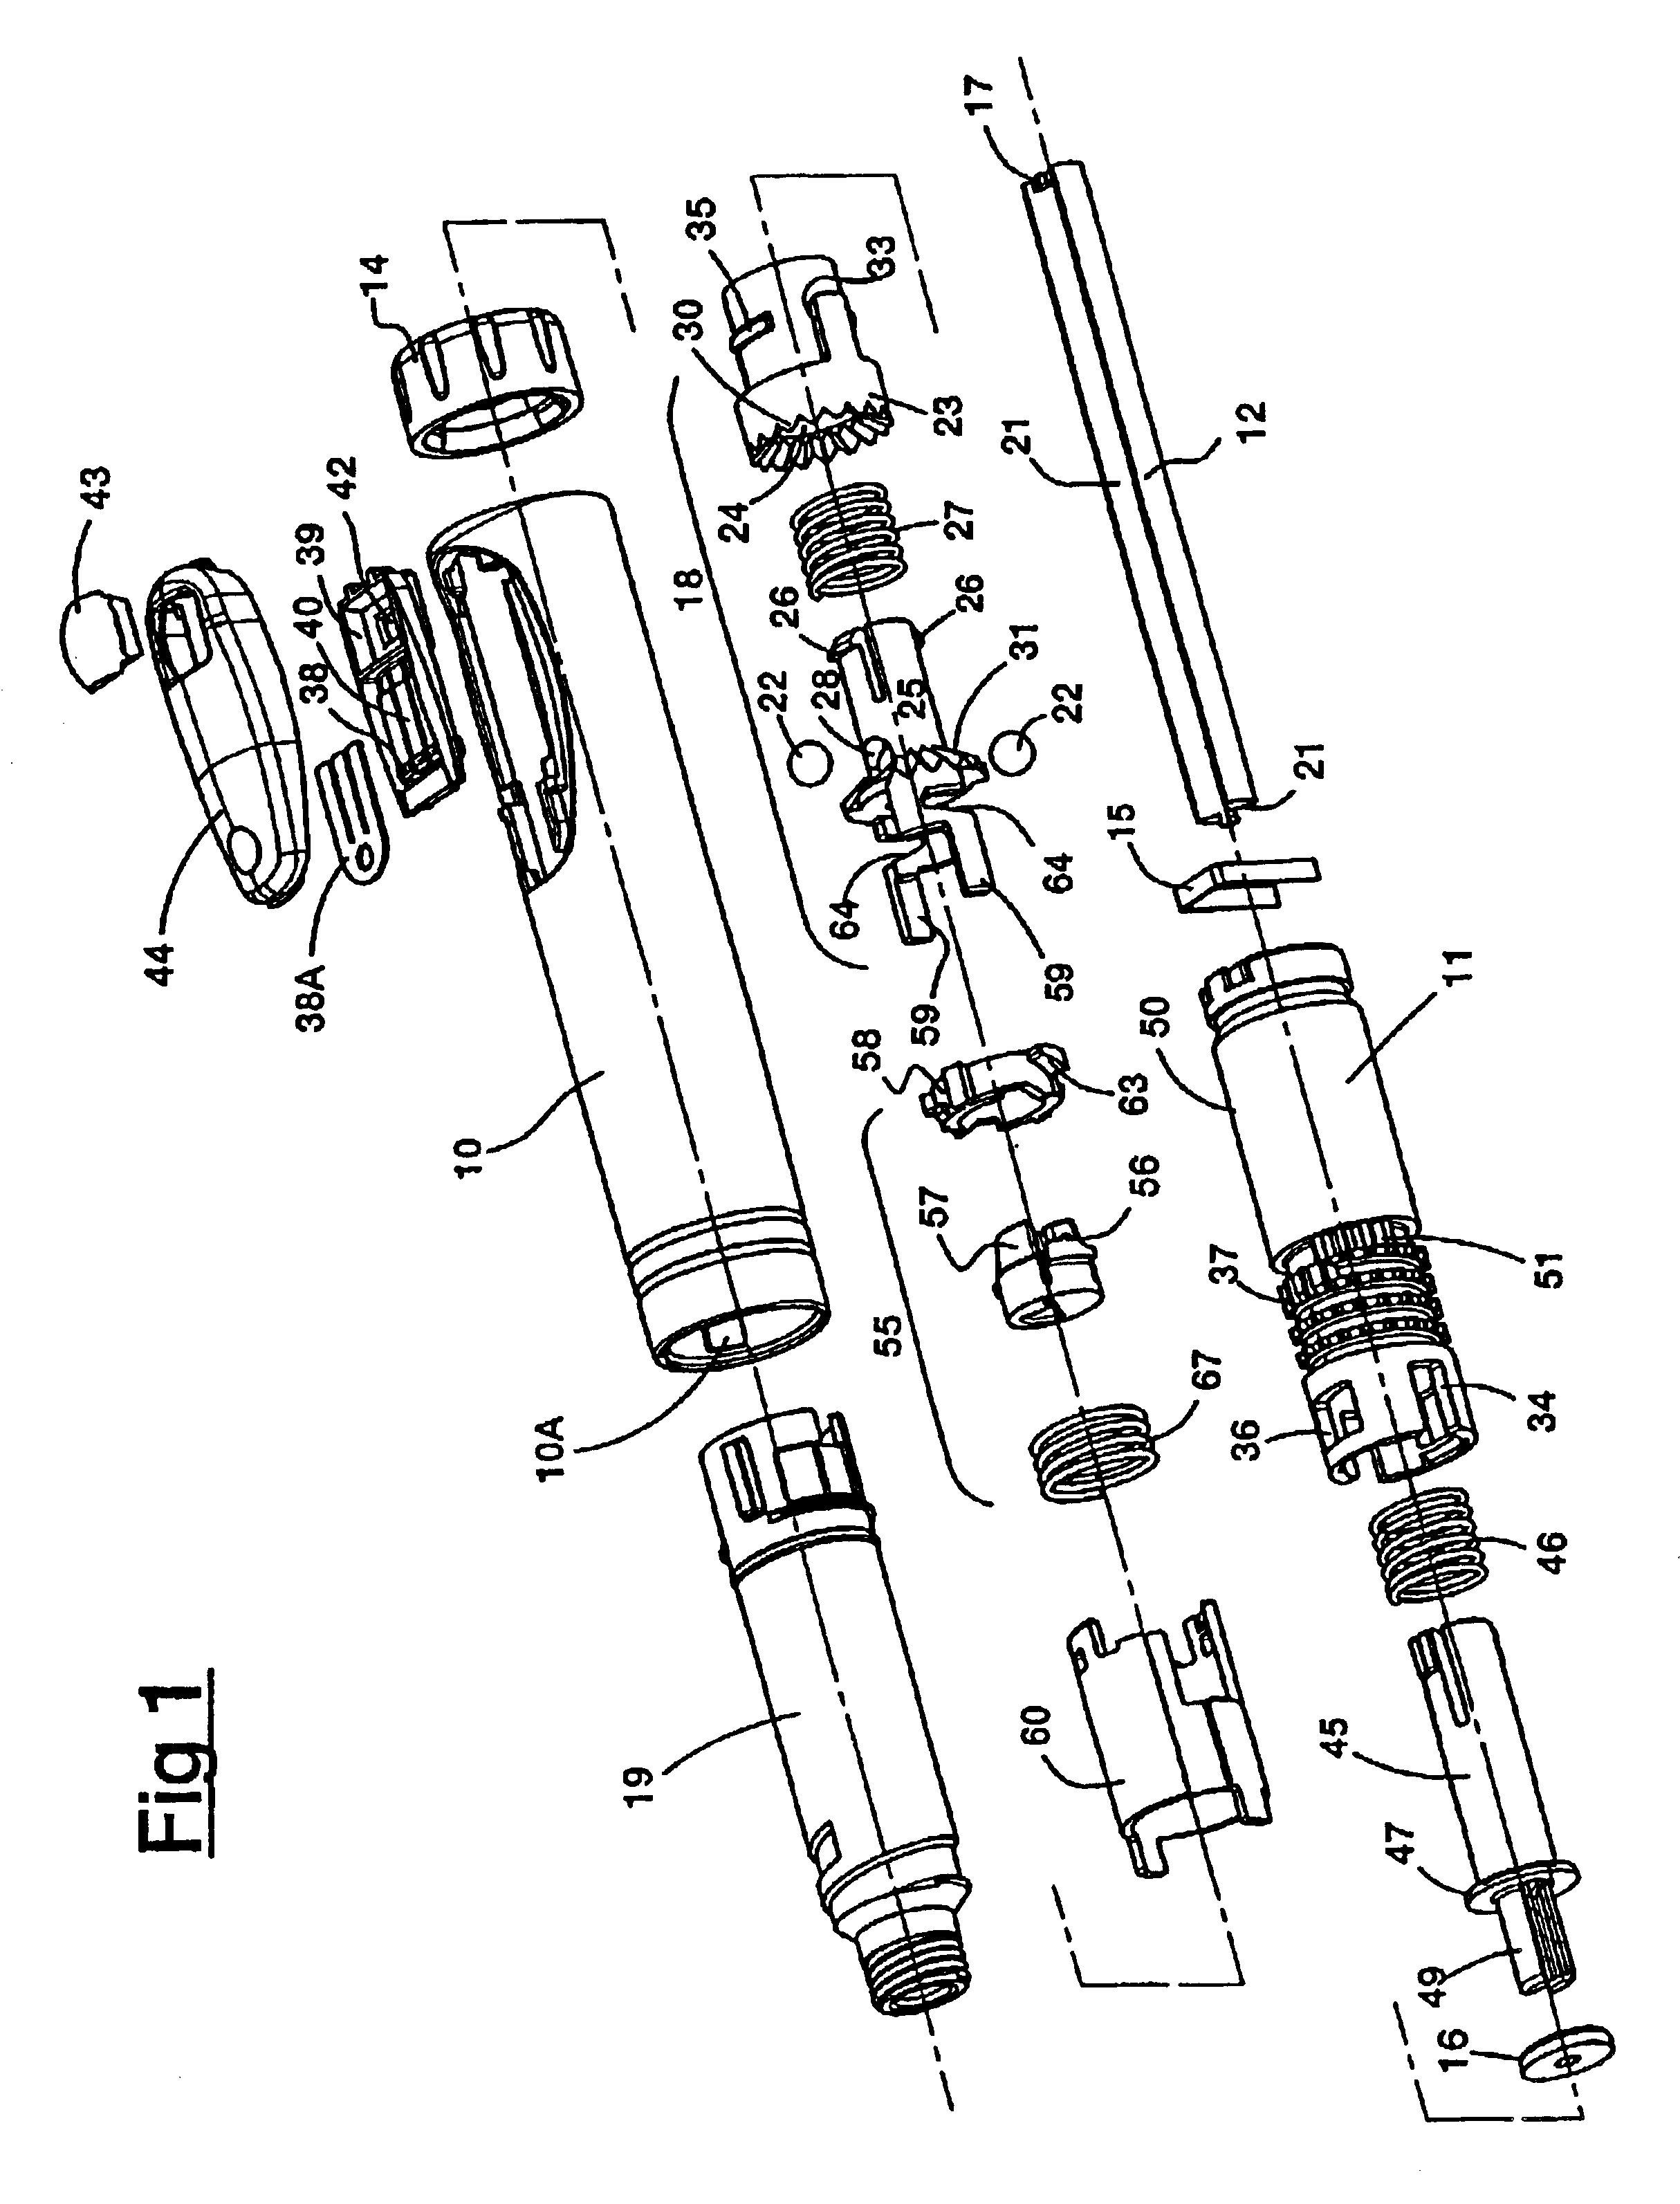 One-way clutch mechanisms and injector devices